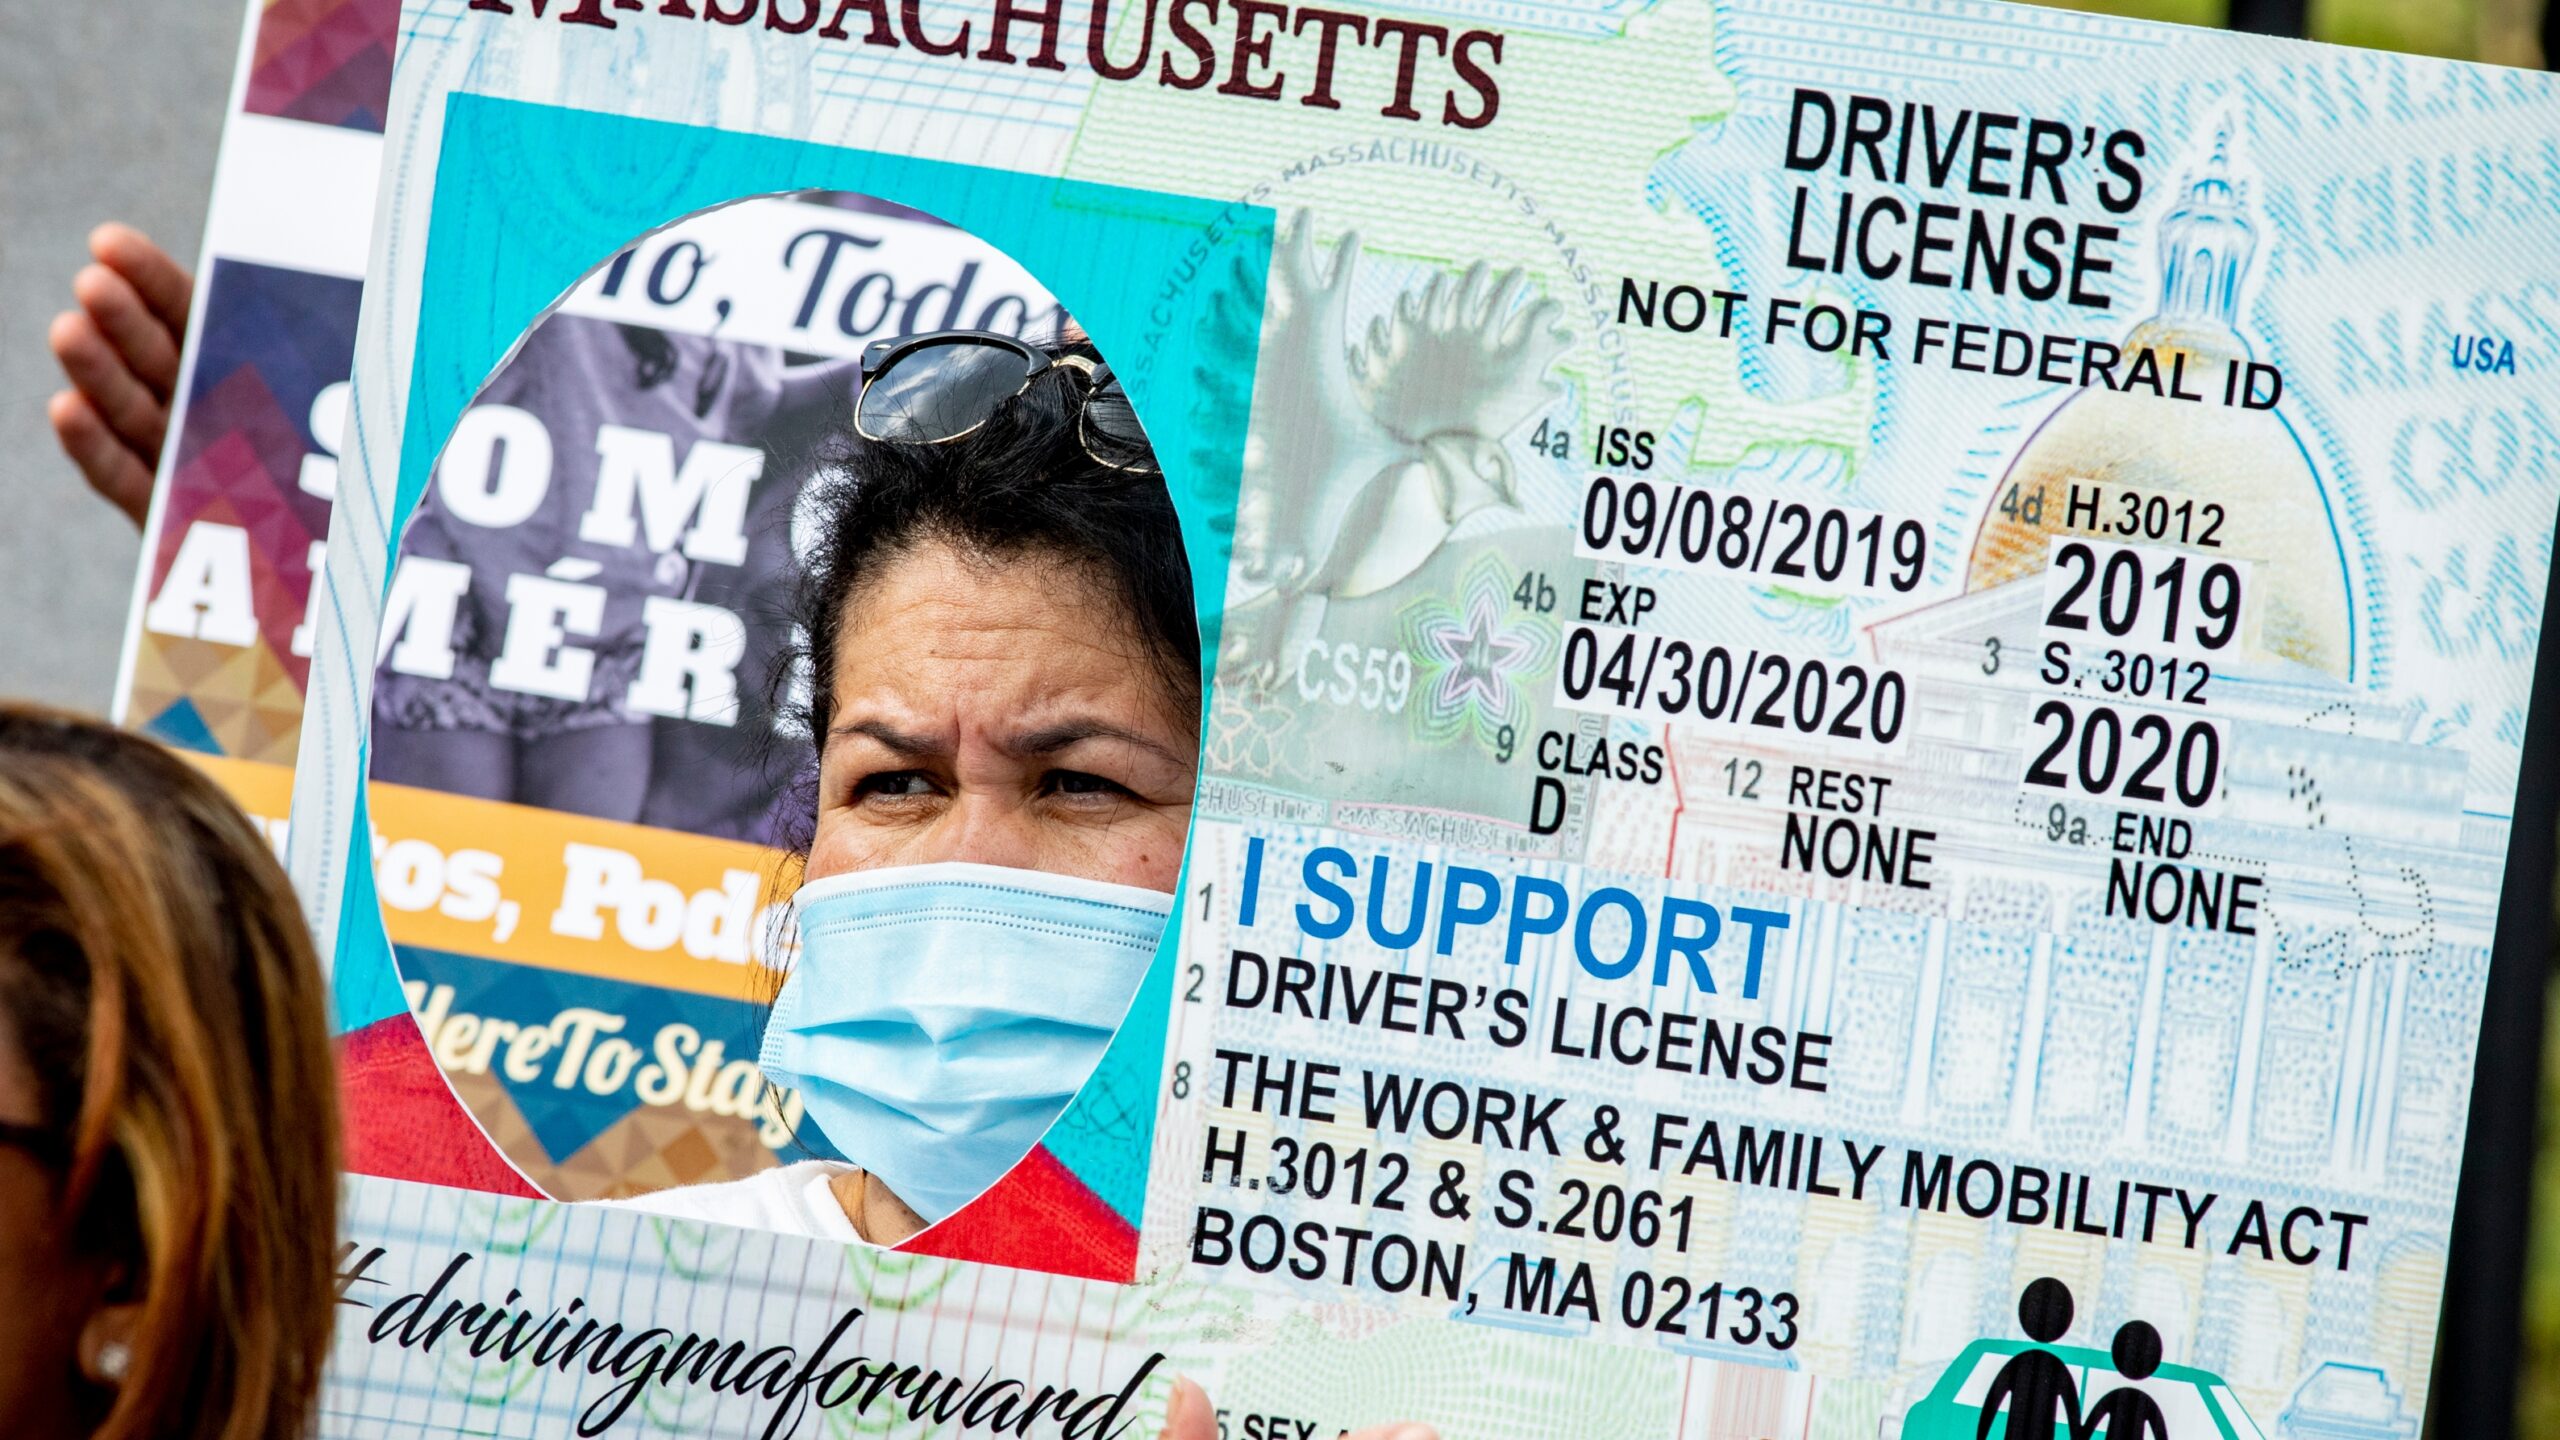 Mass. maintains policy against granting licenses to illegals